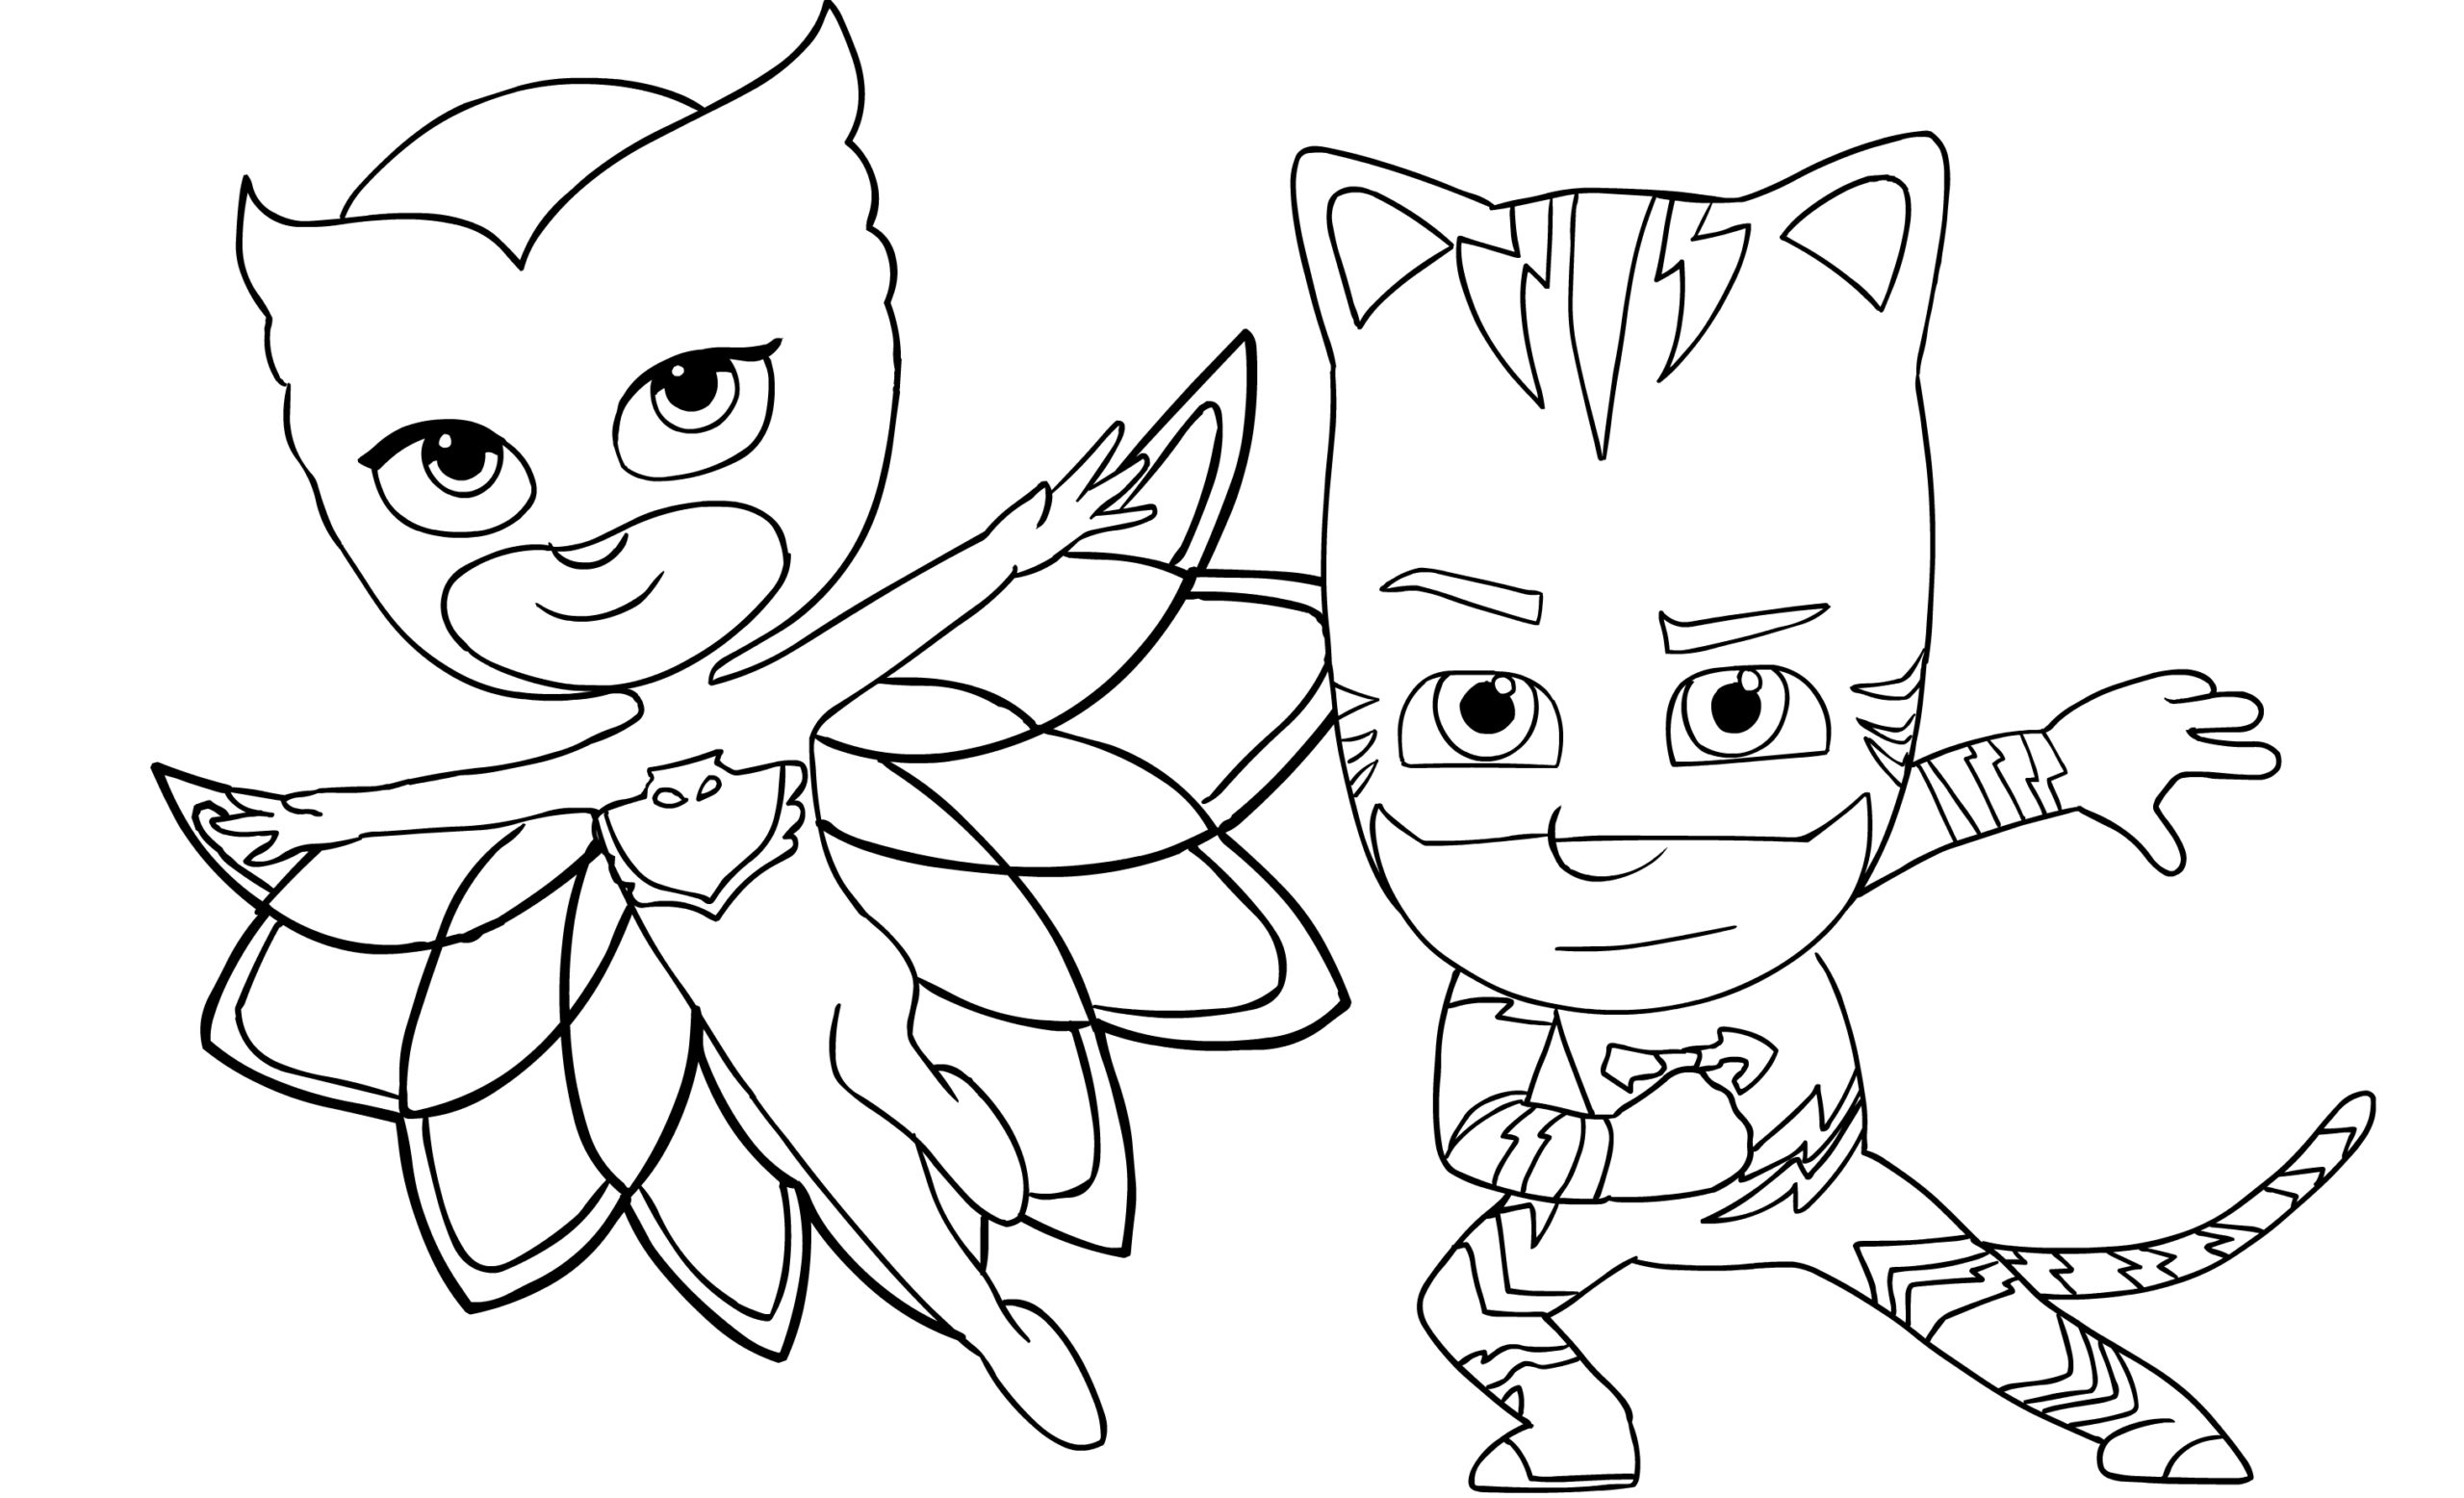 Coloring Page Catboy / PJ MASKS Coloring Book | Drawing and Coloring PJ